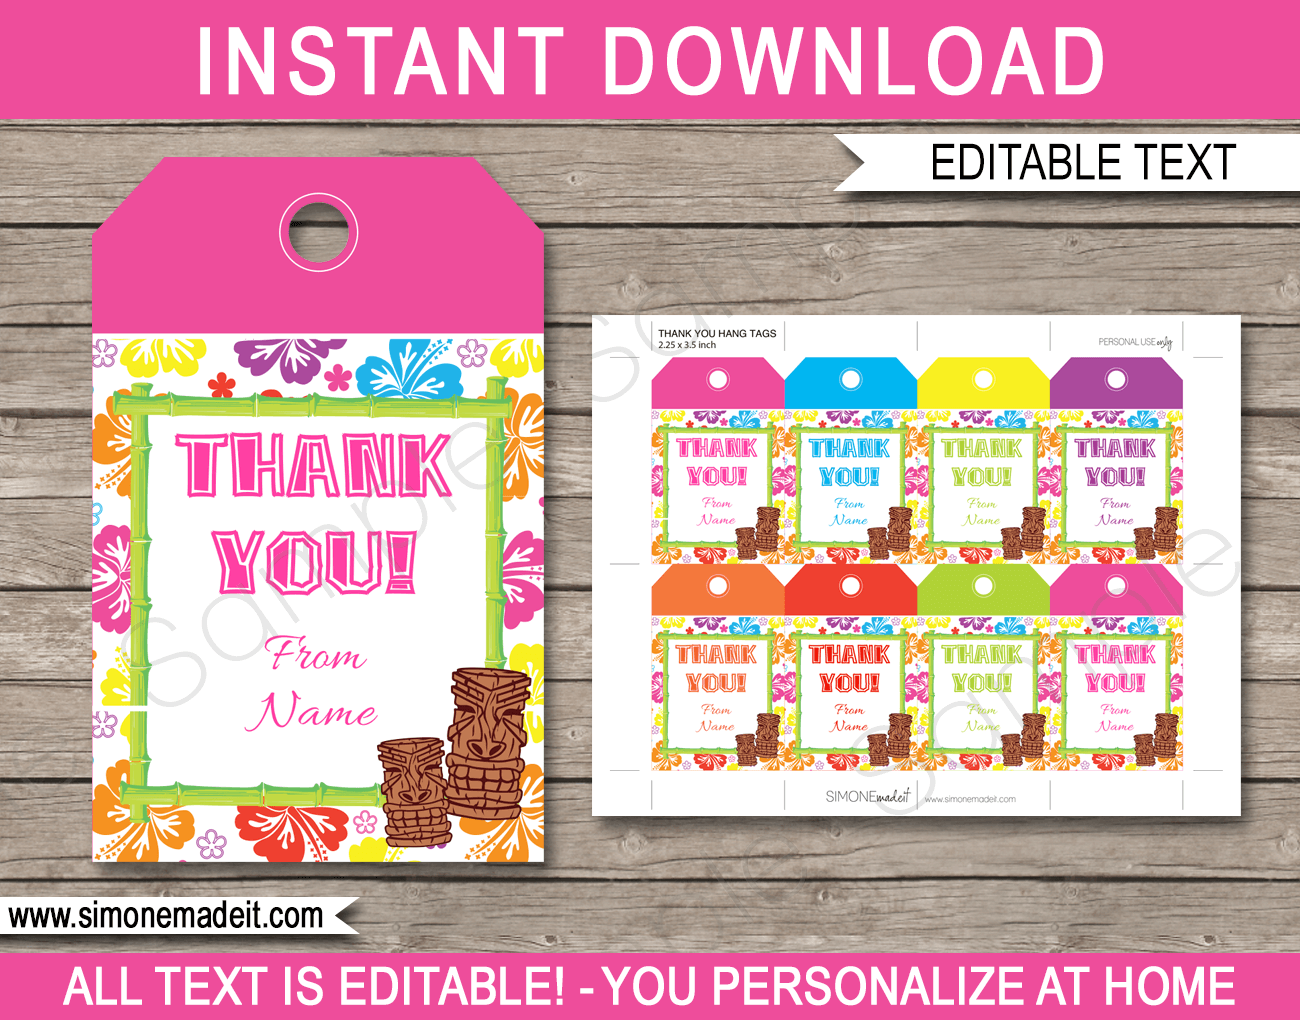 Luau Party Favor Tags | Thank You Tags | Birthday Party | Editable DIY Template | $3.00 INSTANT DOWNLOAD via SIMONEmadeit.com